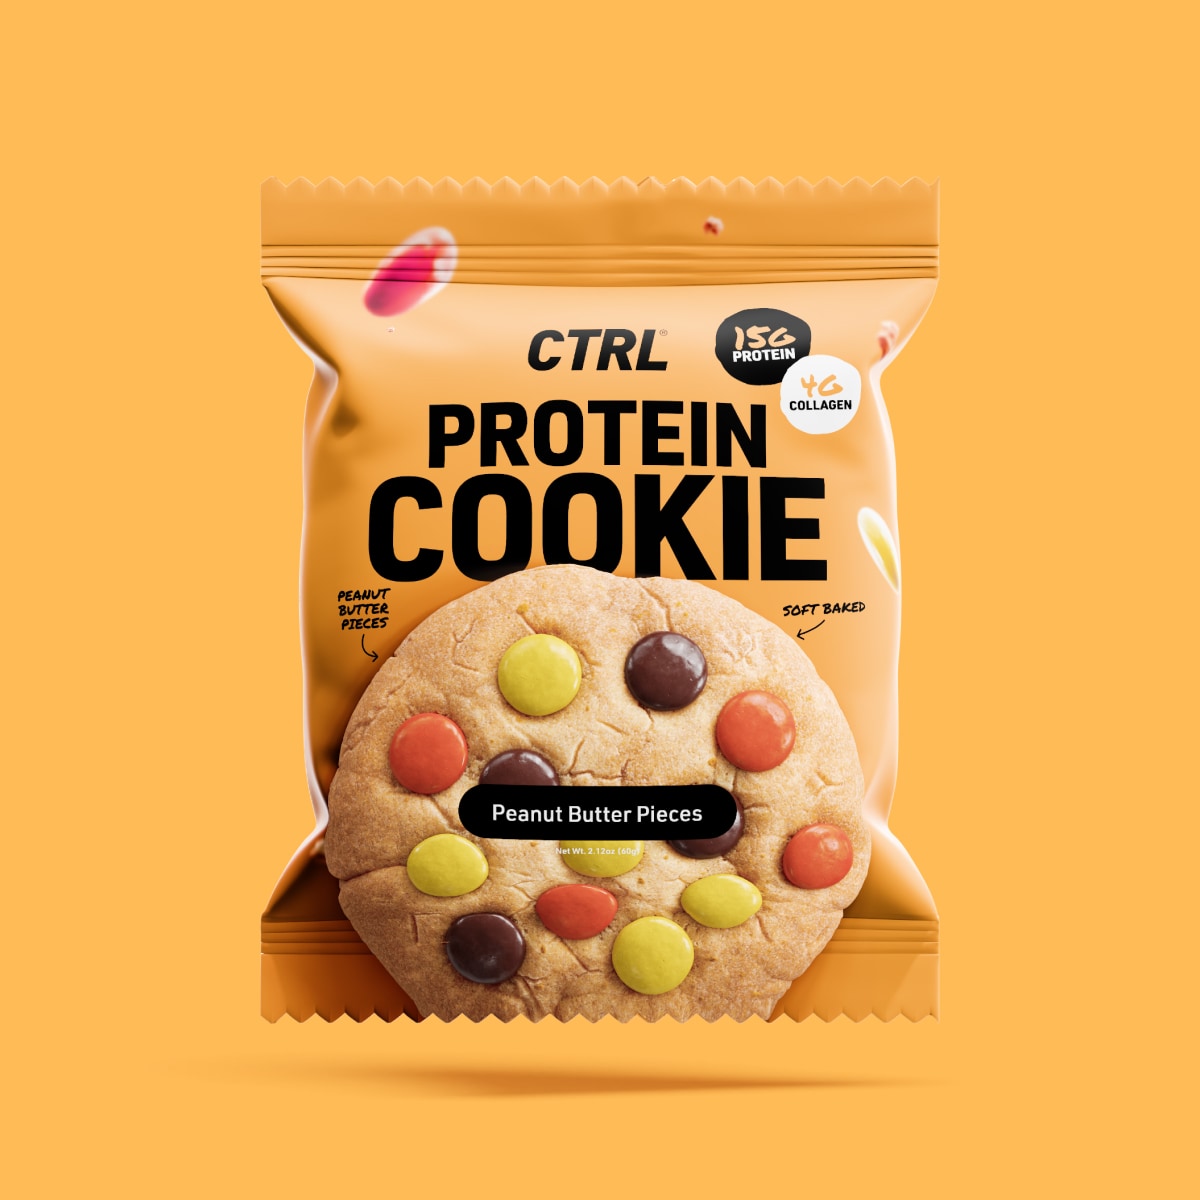 Peanut Butter Pieces - Protein Cookie (1 Cookie)